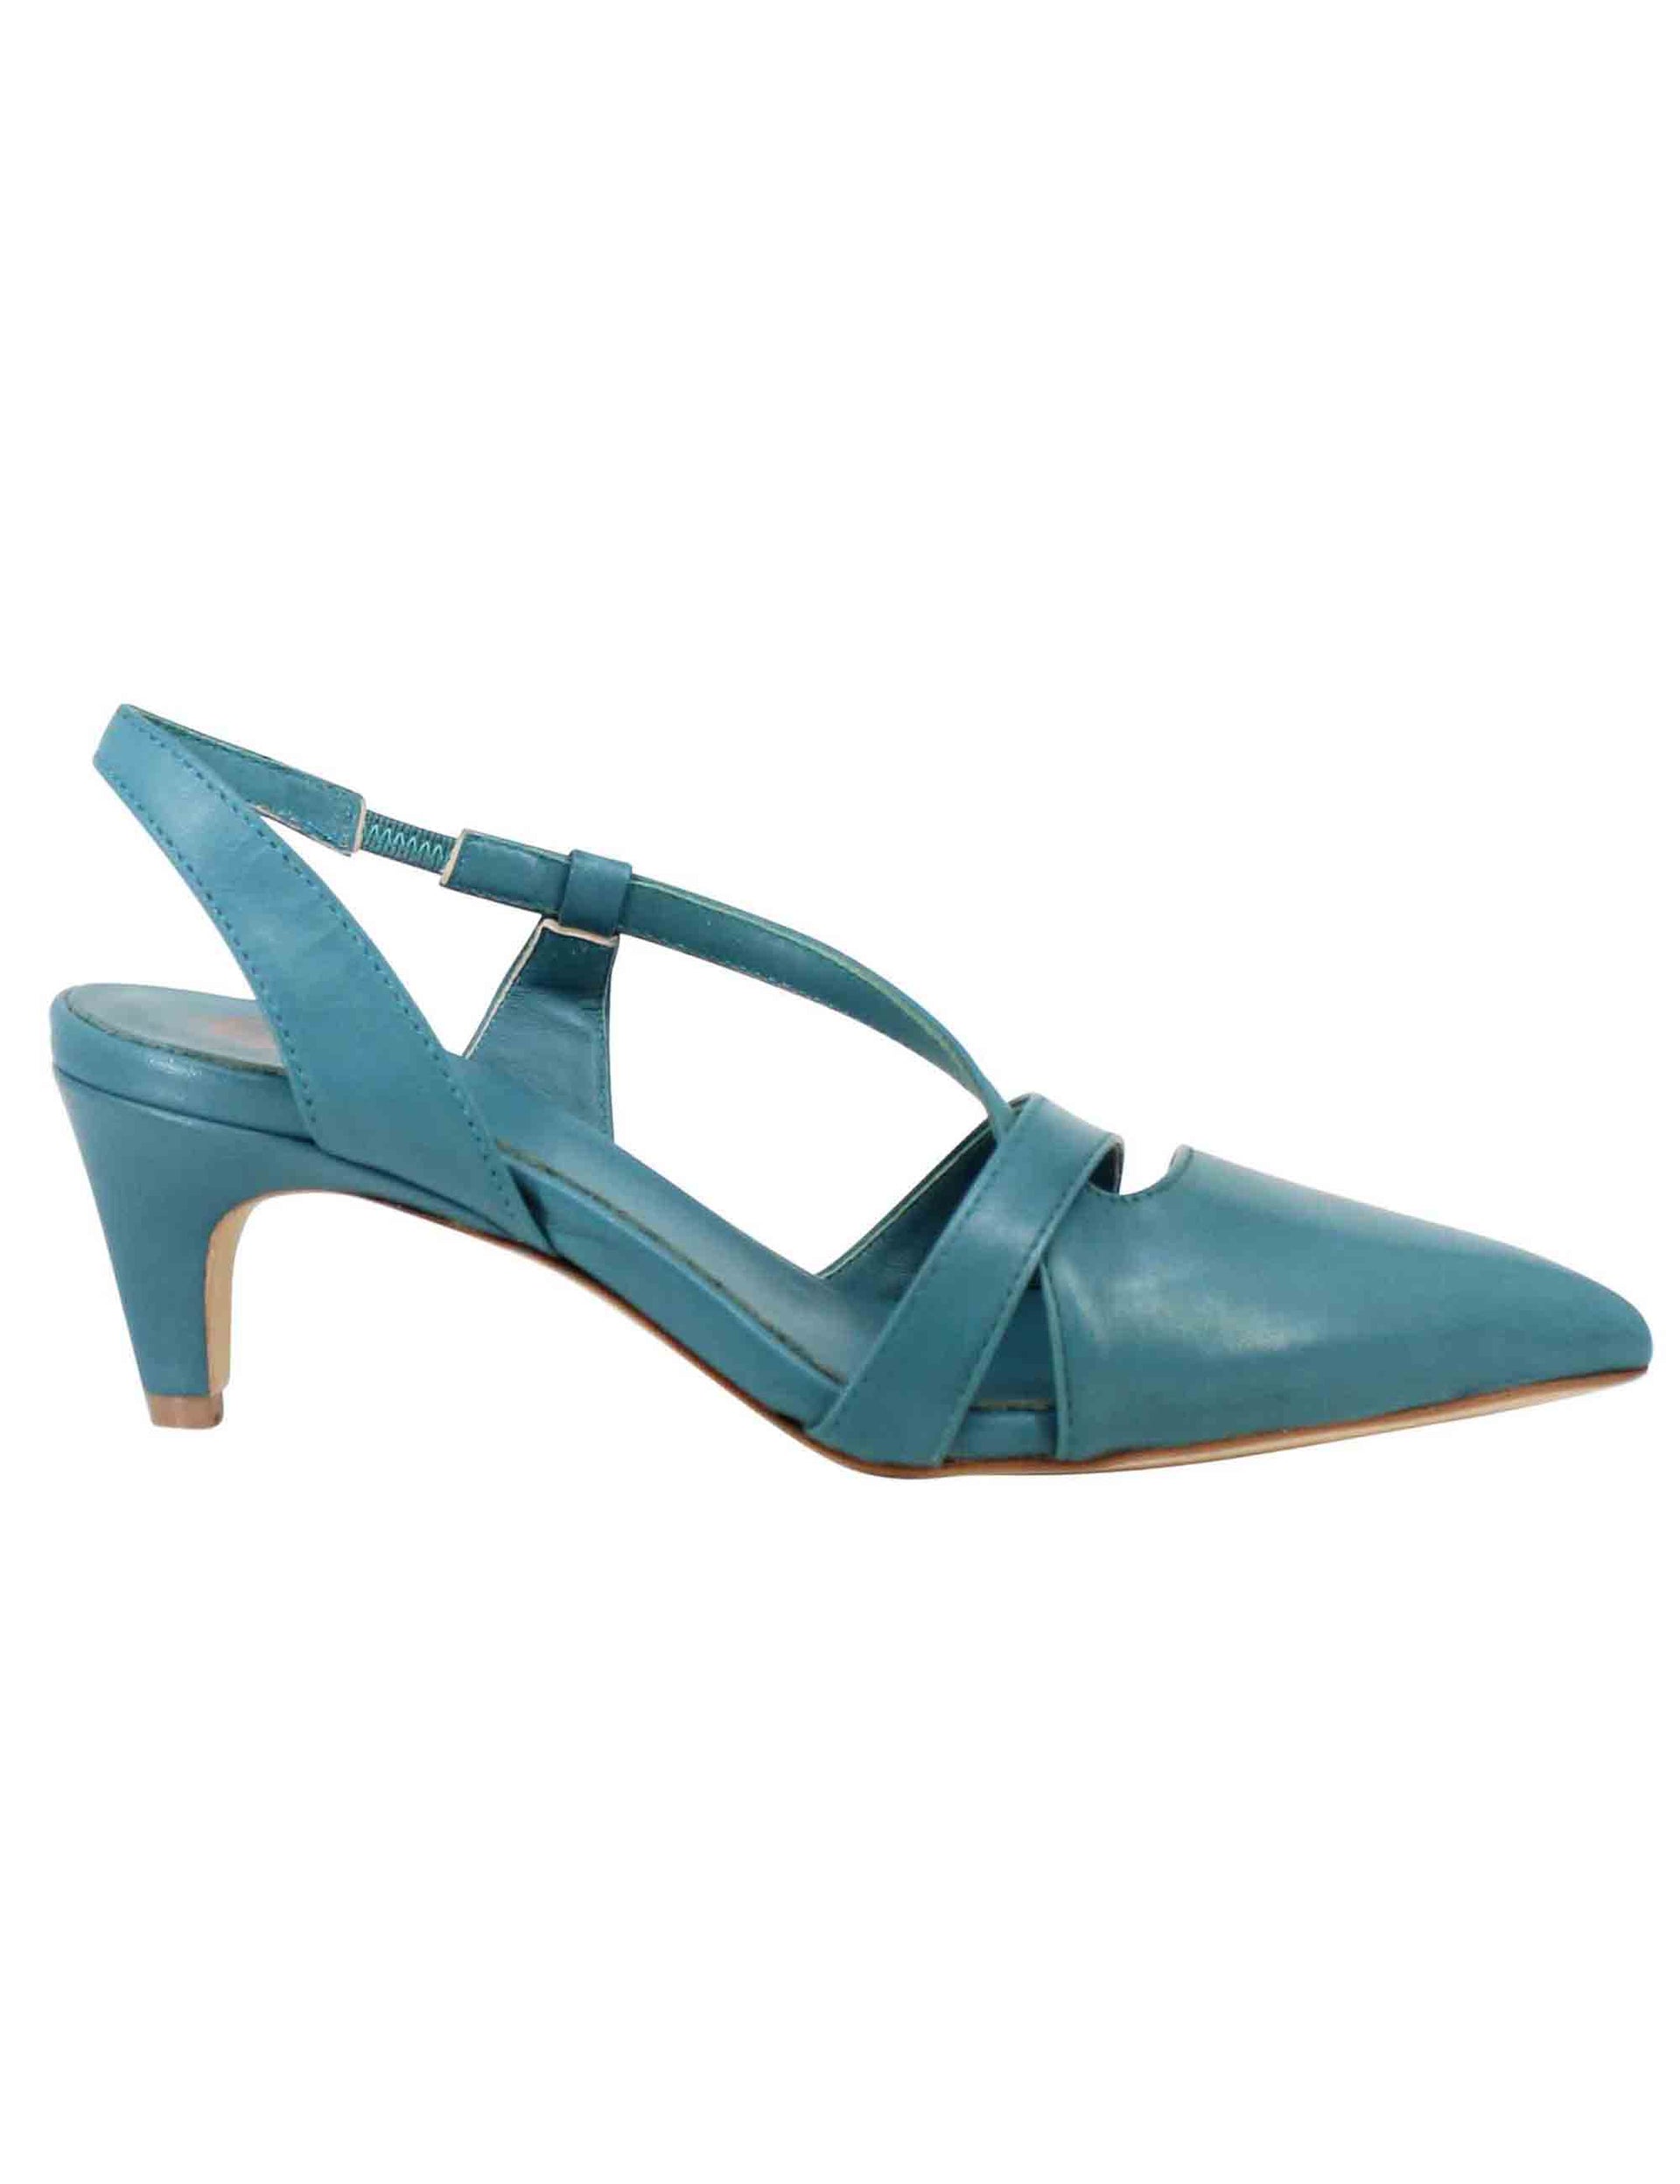 Women's slingback pumps in teal leather with low heel